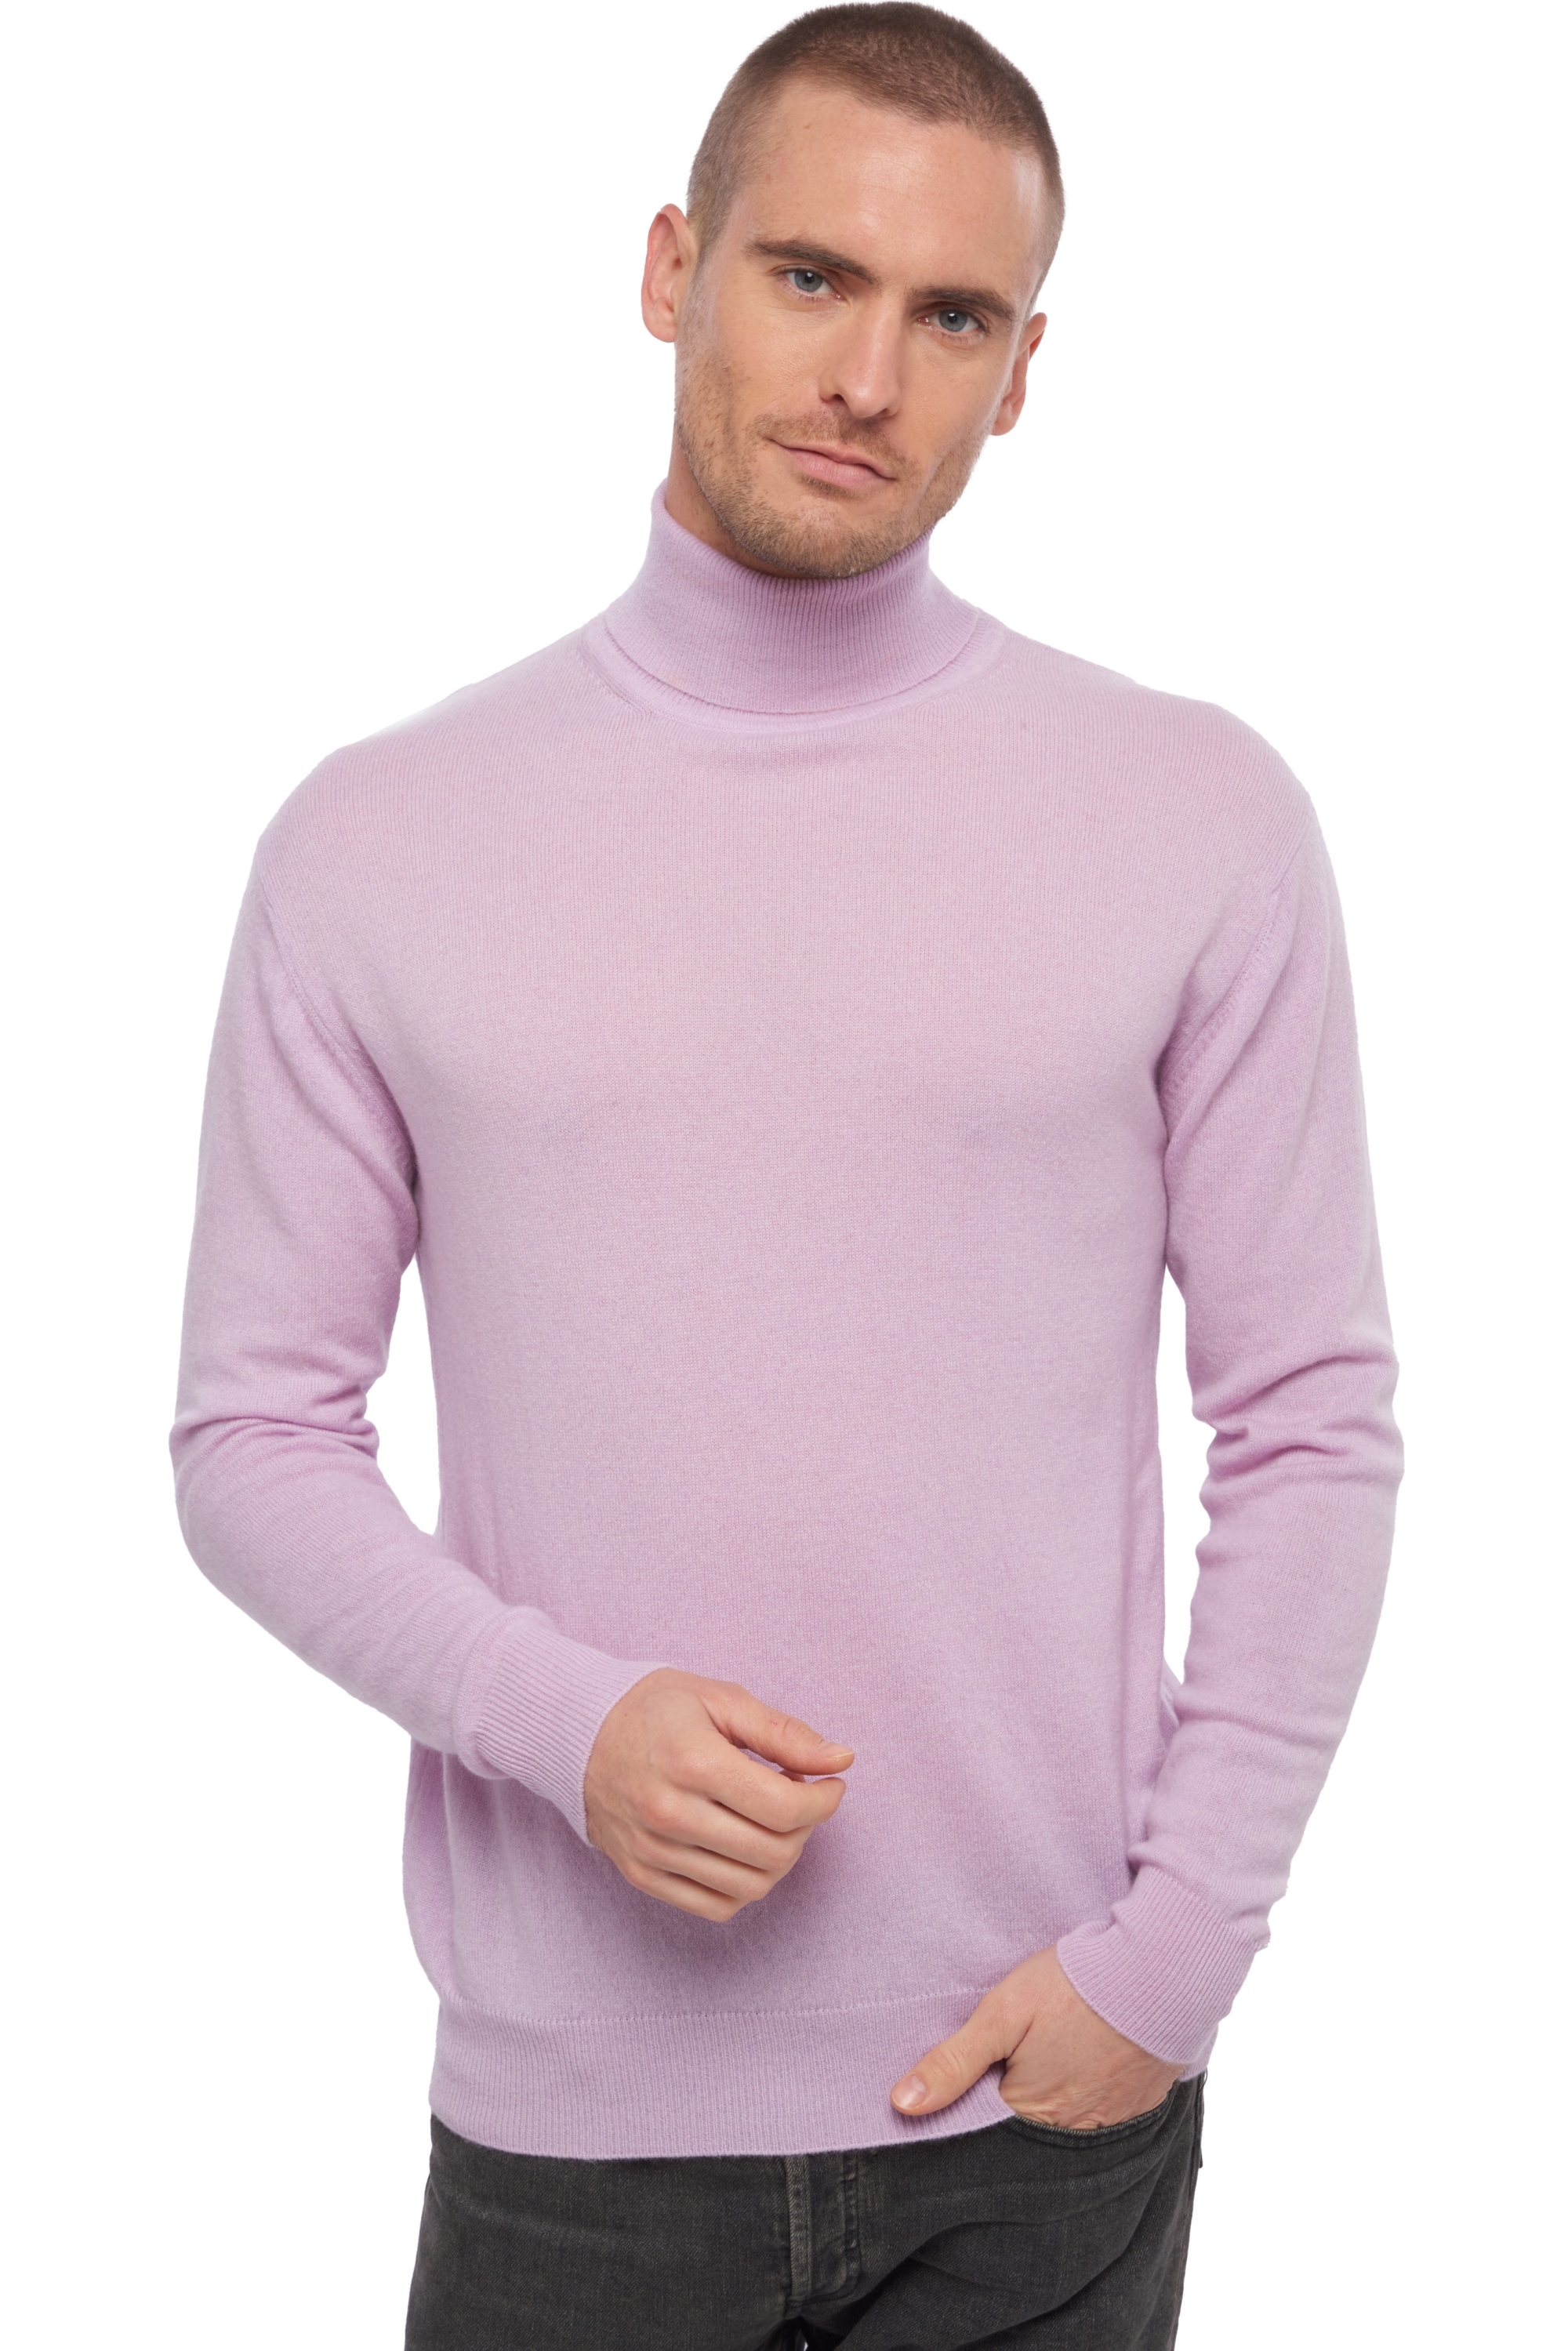 Cachemire pull homme edgar lilas m